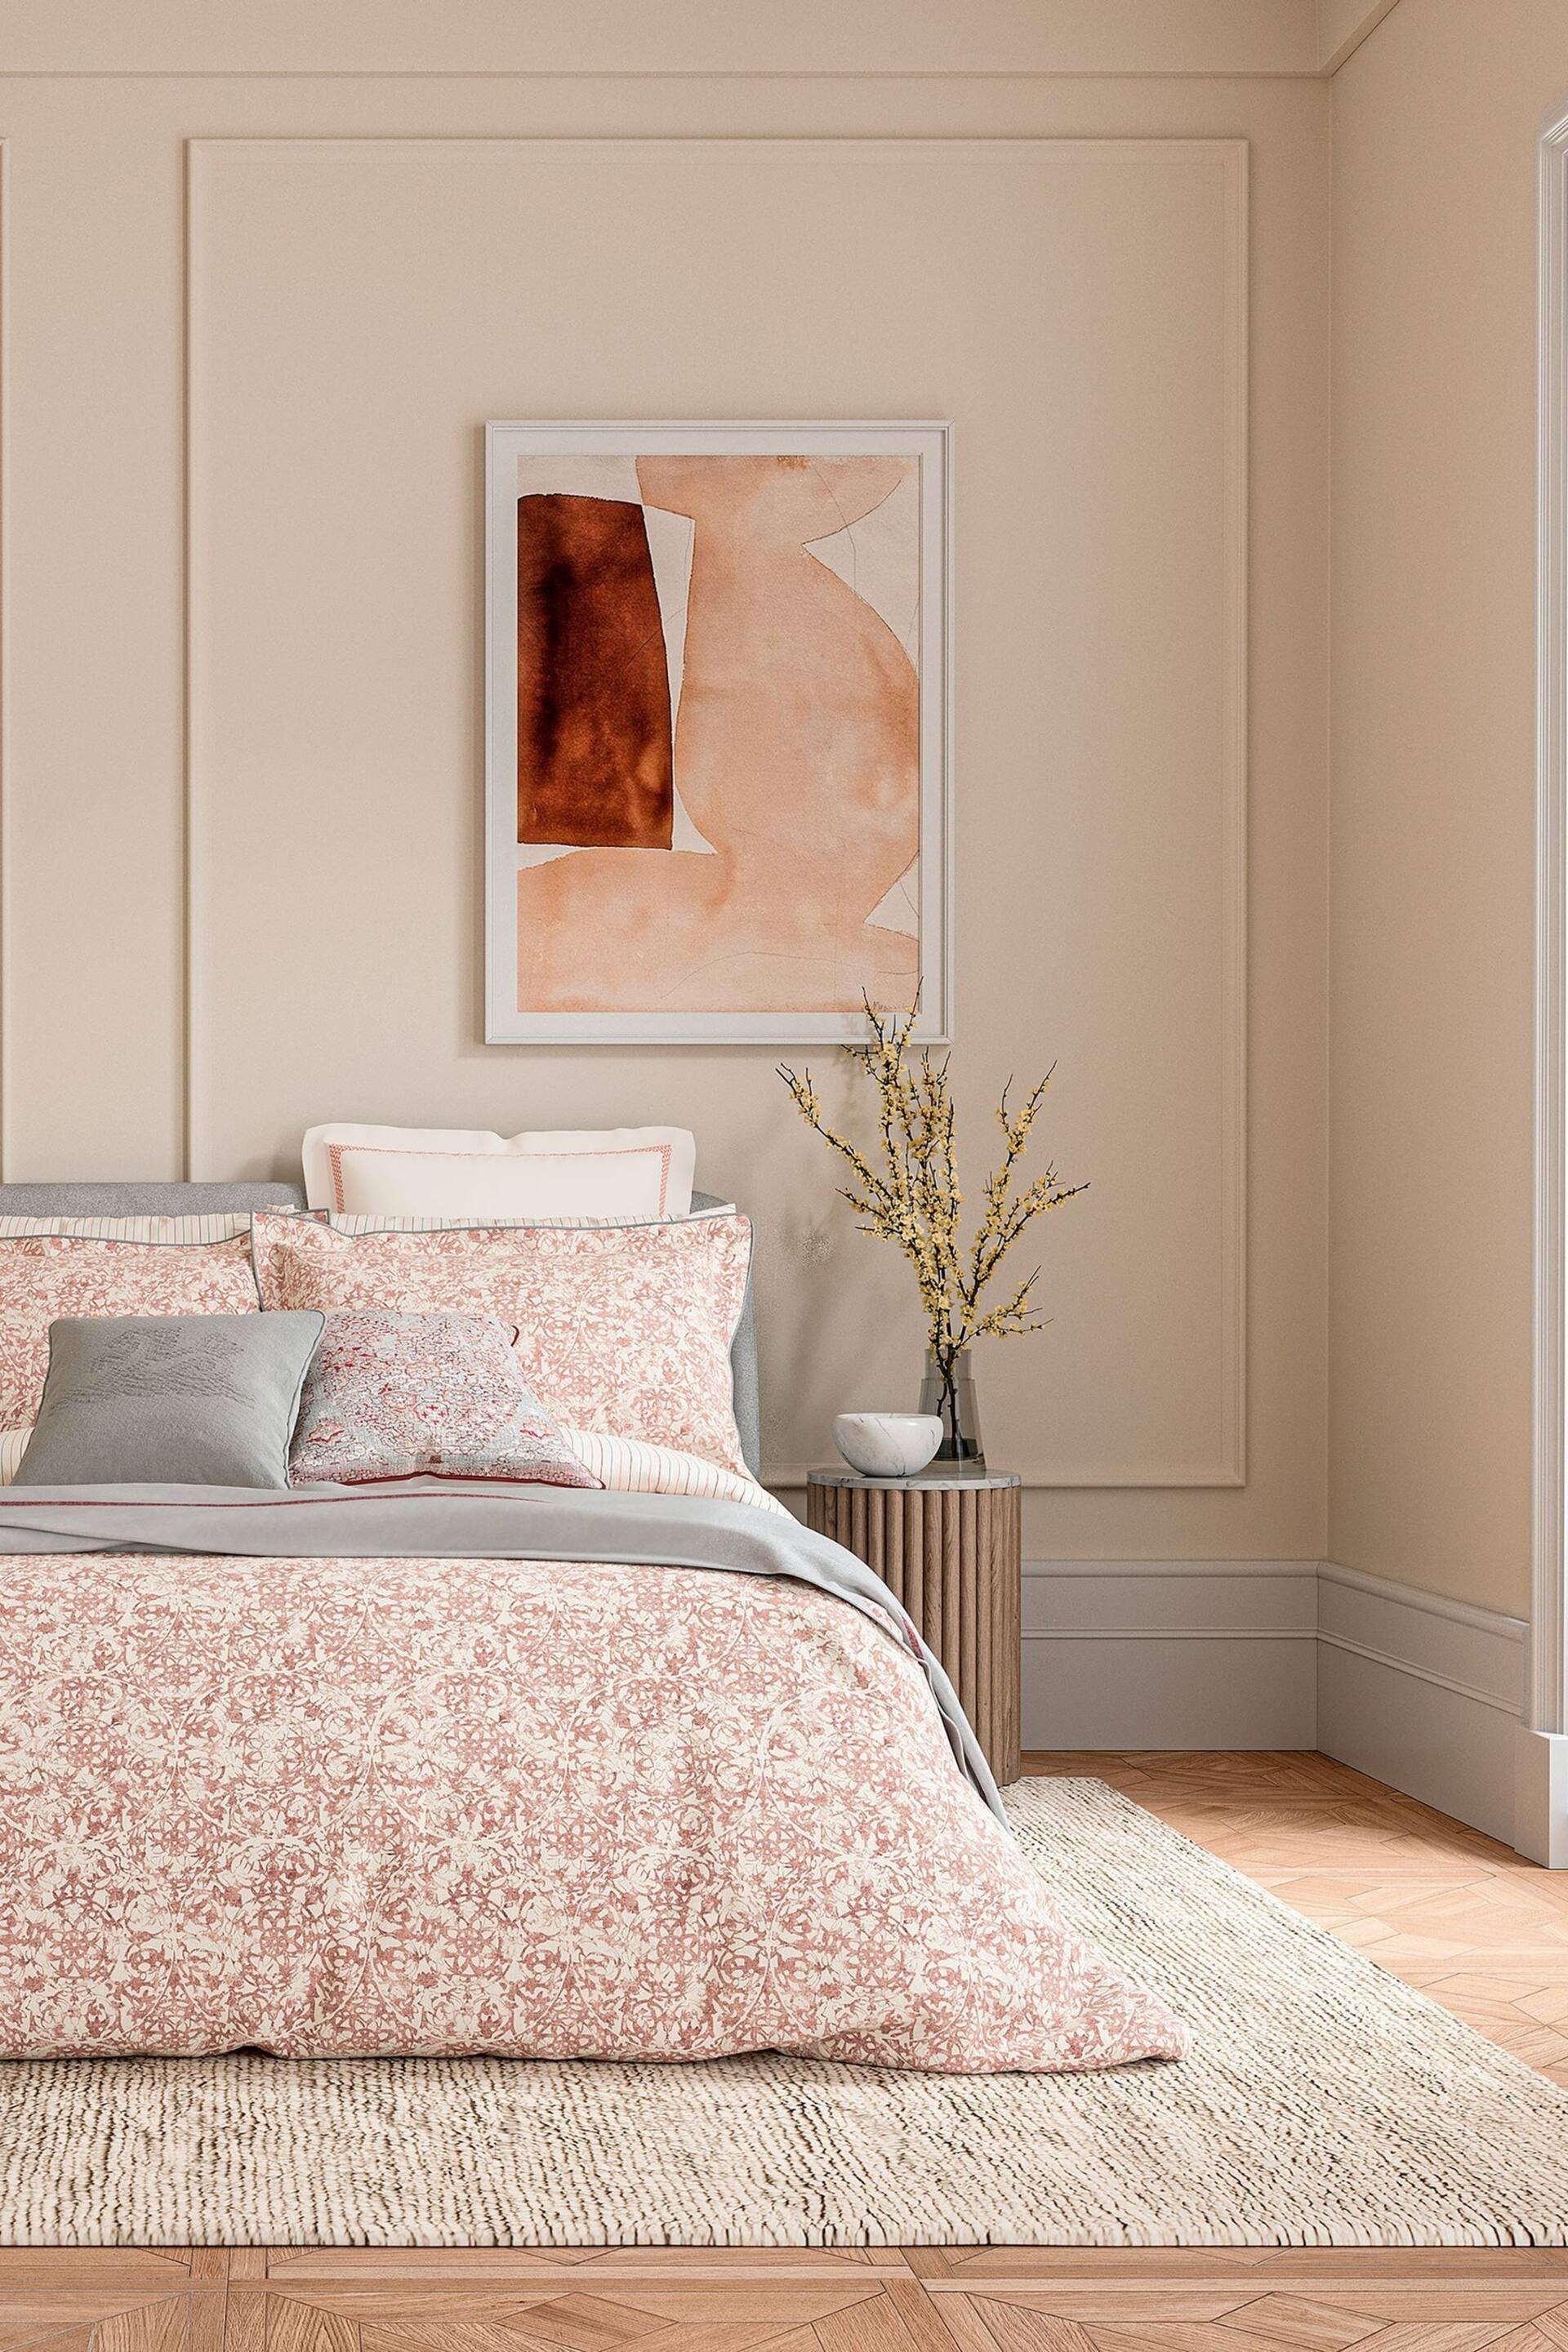 Bedeck of Belfast Coral Celina Duvet Cover and Pillowcase Set - Image 1 of 4